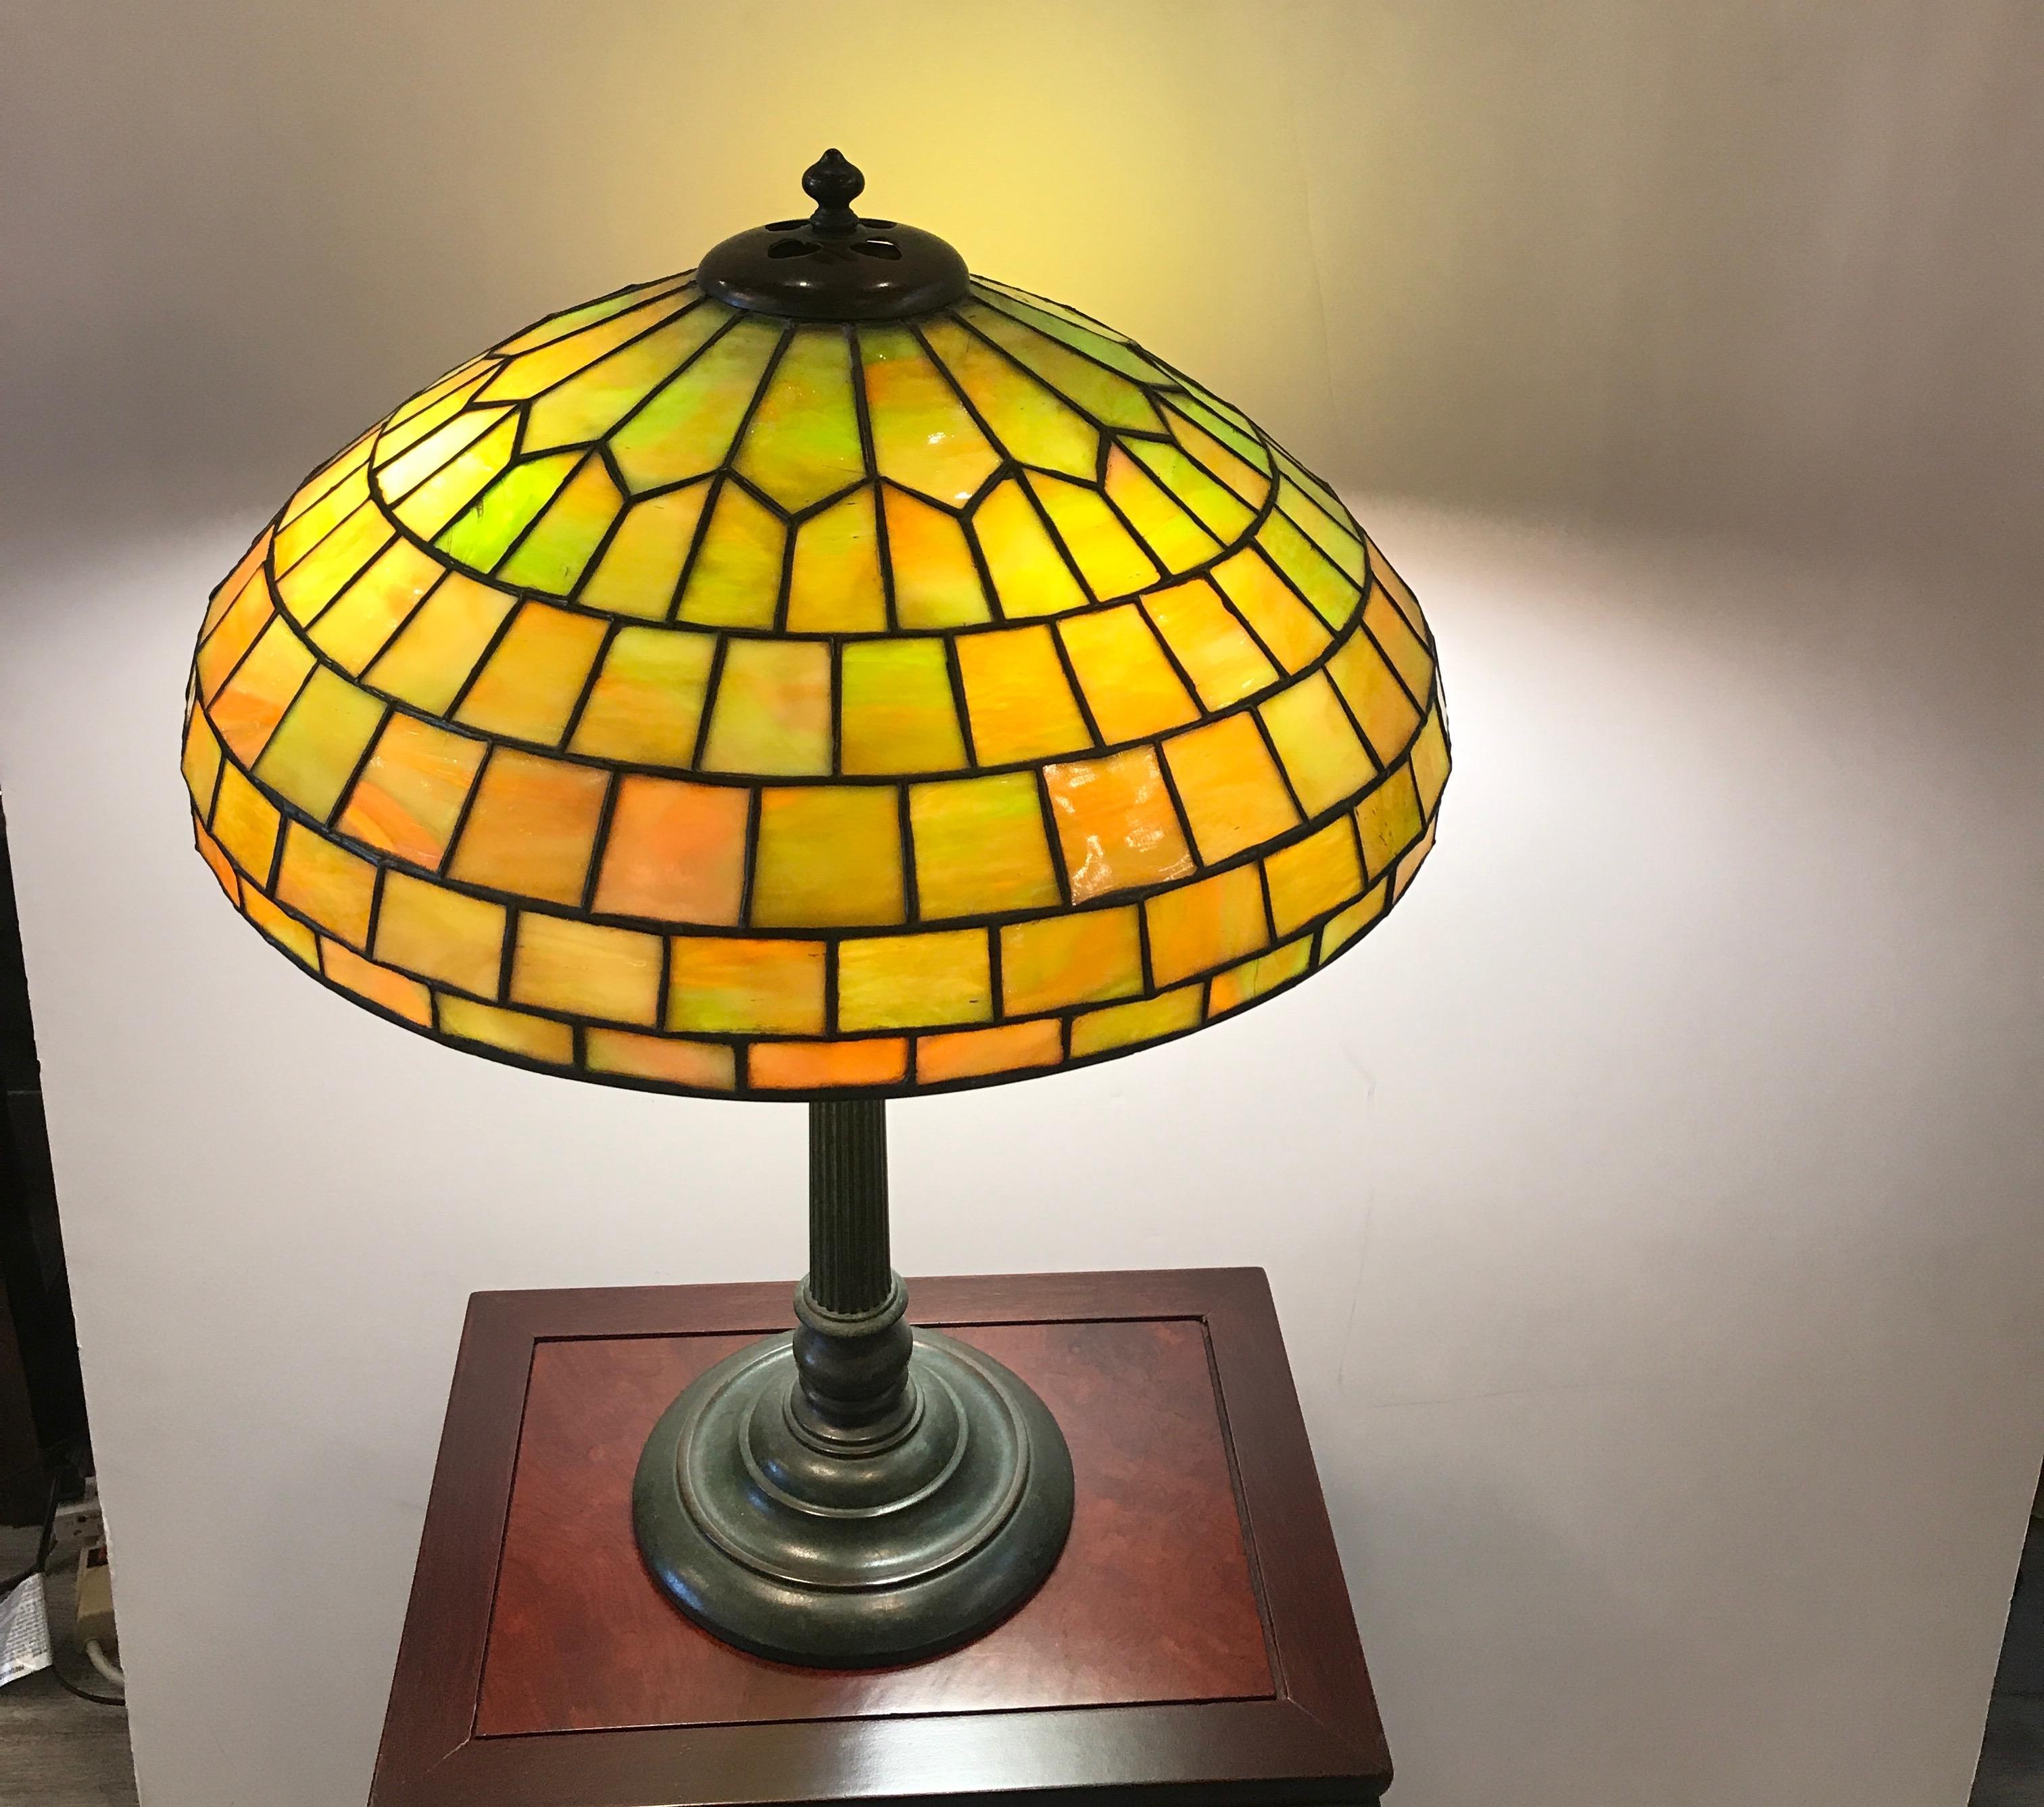 A leaded glass and bronze table or desk lamp, early 20th century
Duffner & Kimberly was a New York City company which produced leaded glass and bronze lamps around the same time as Louis Comfort Tiffany, Tiffany Studios. The Duffner & Kimberly